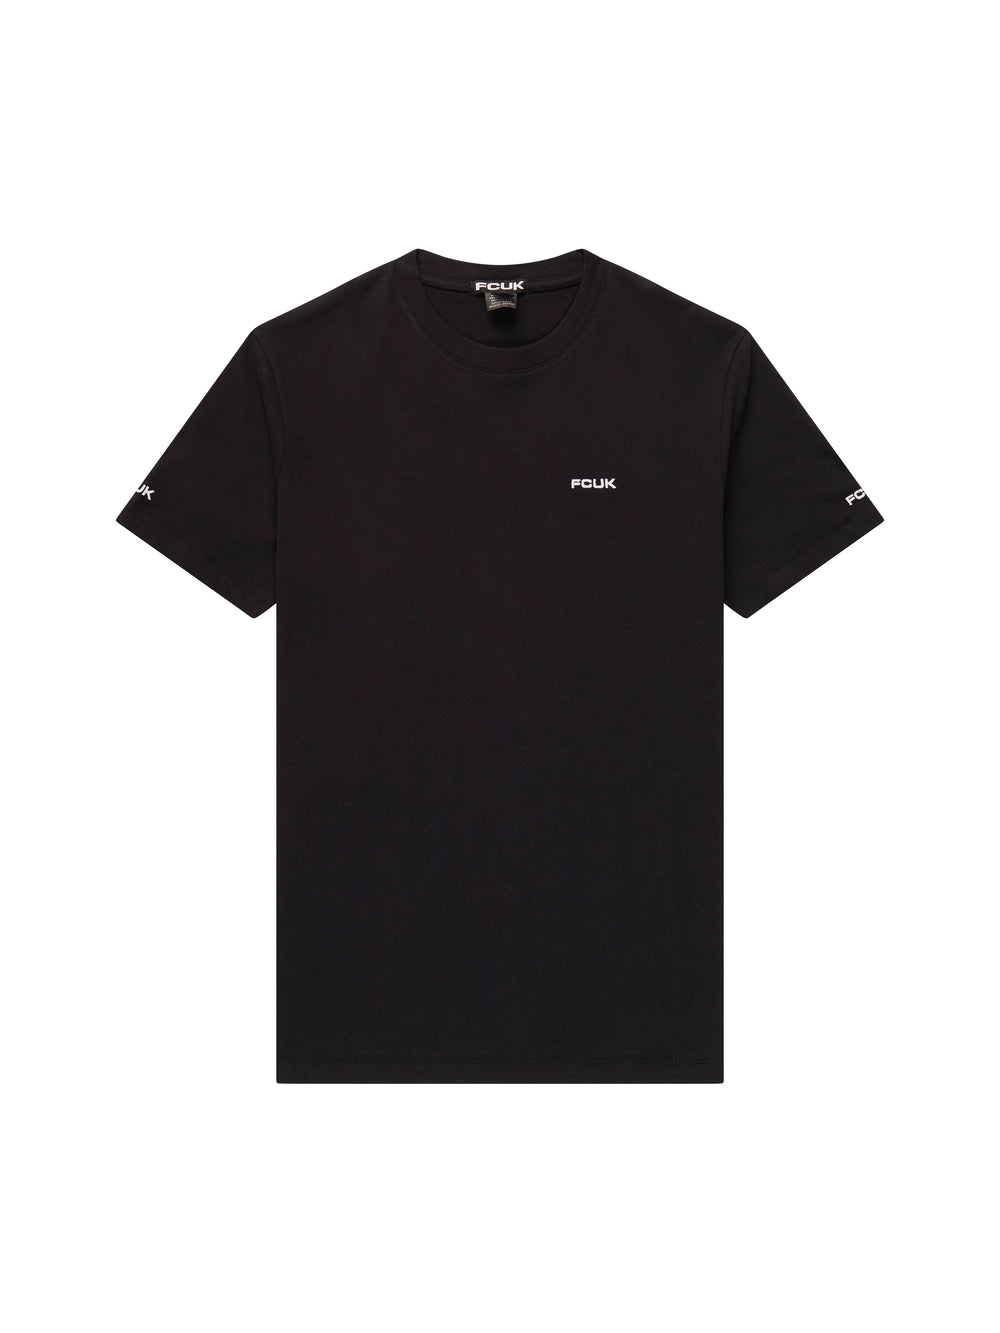 FCUK T-Shirt Black/ White | French Connection US